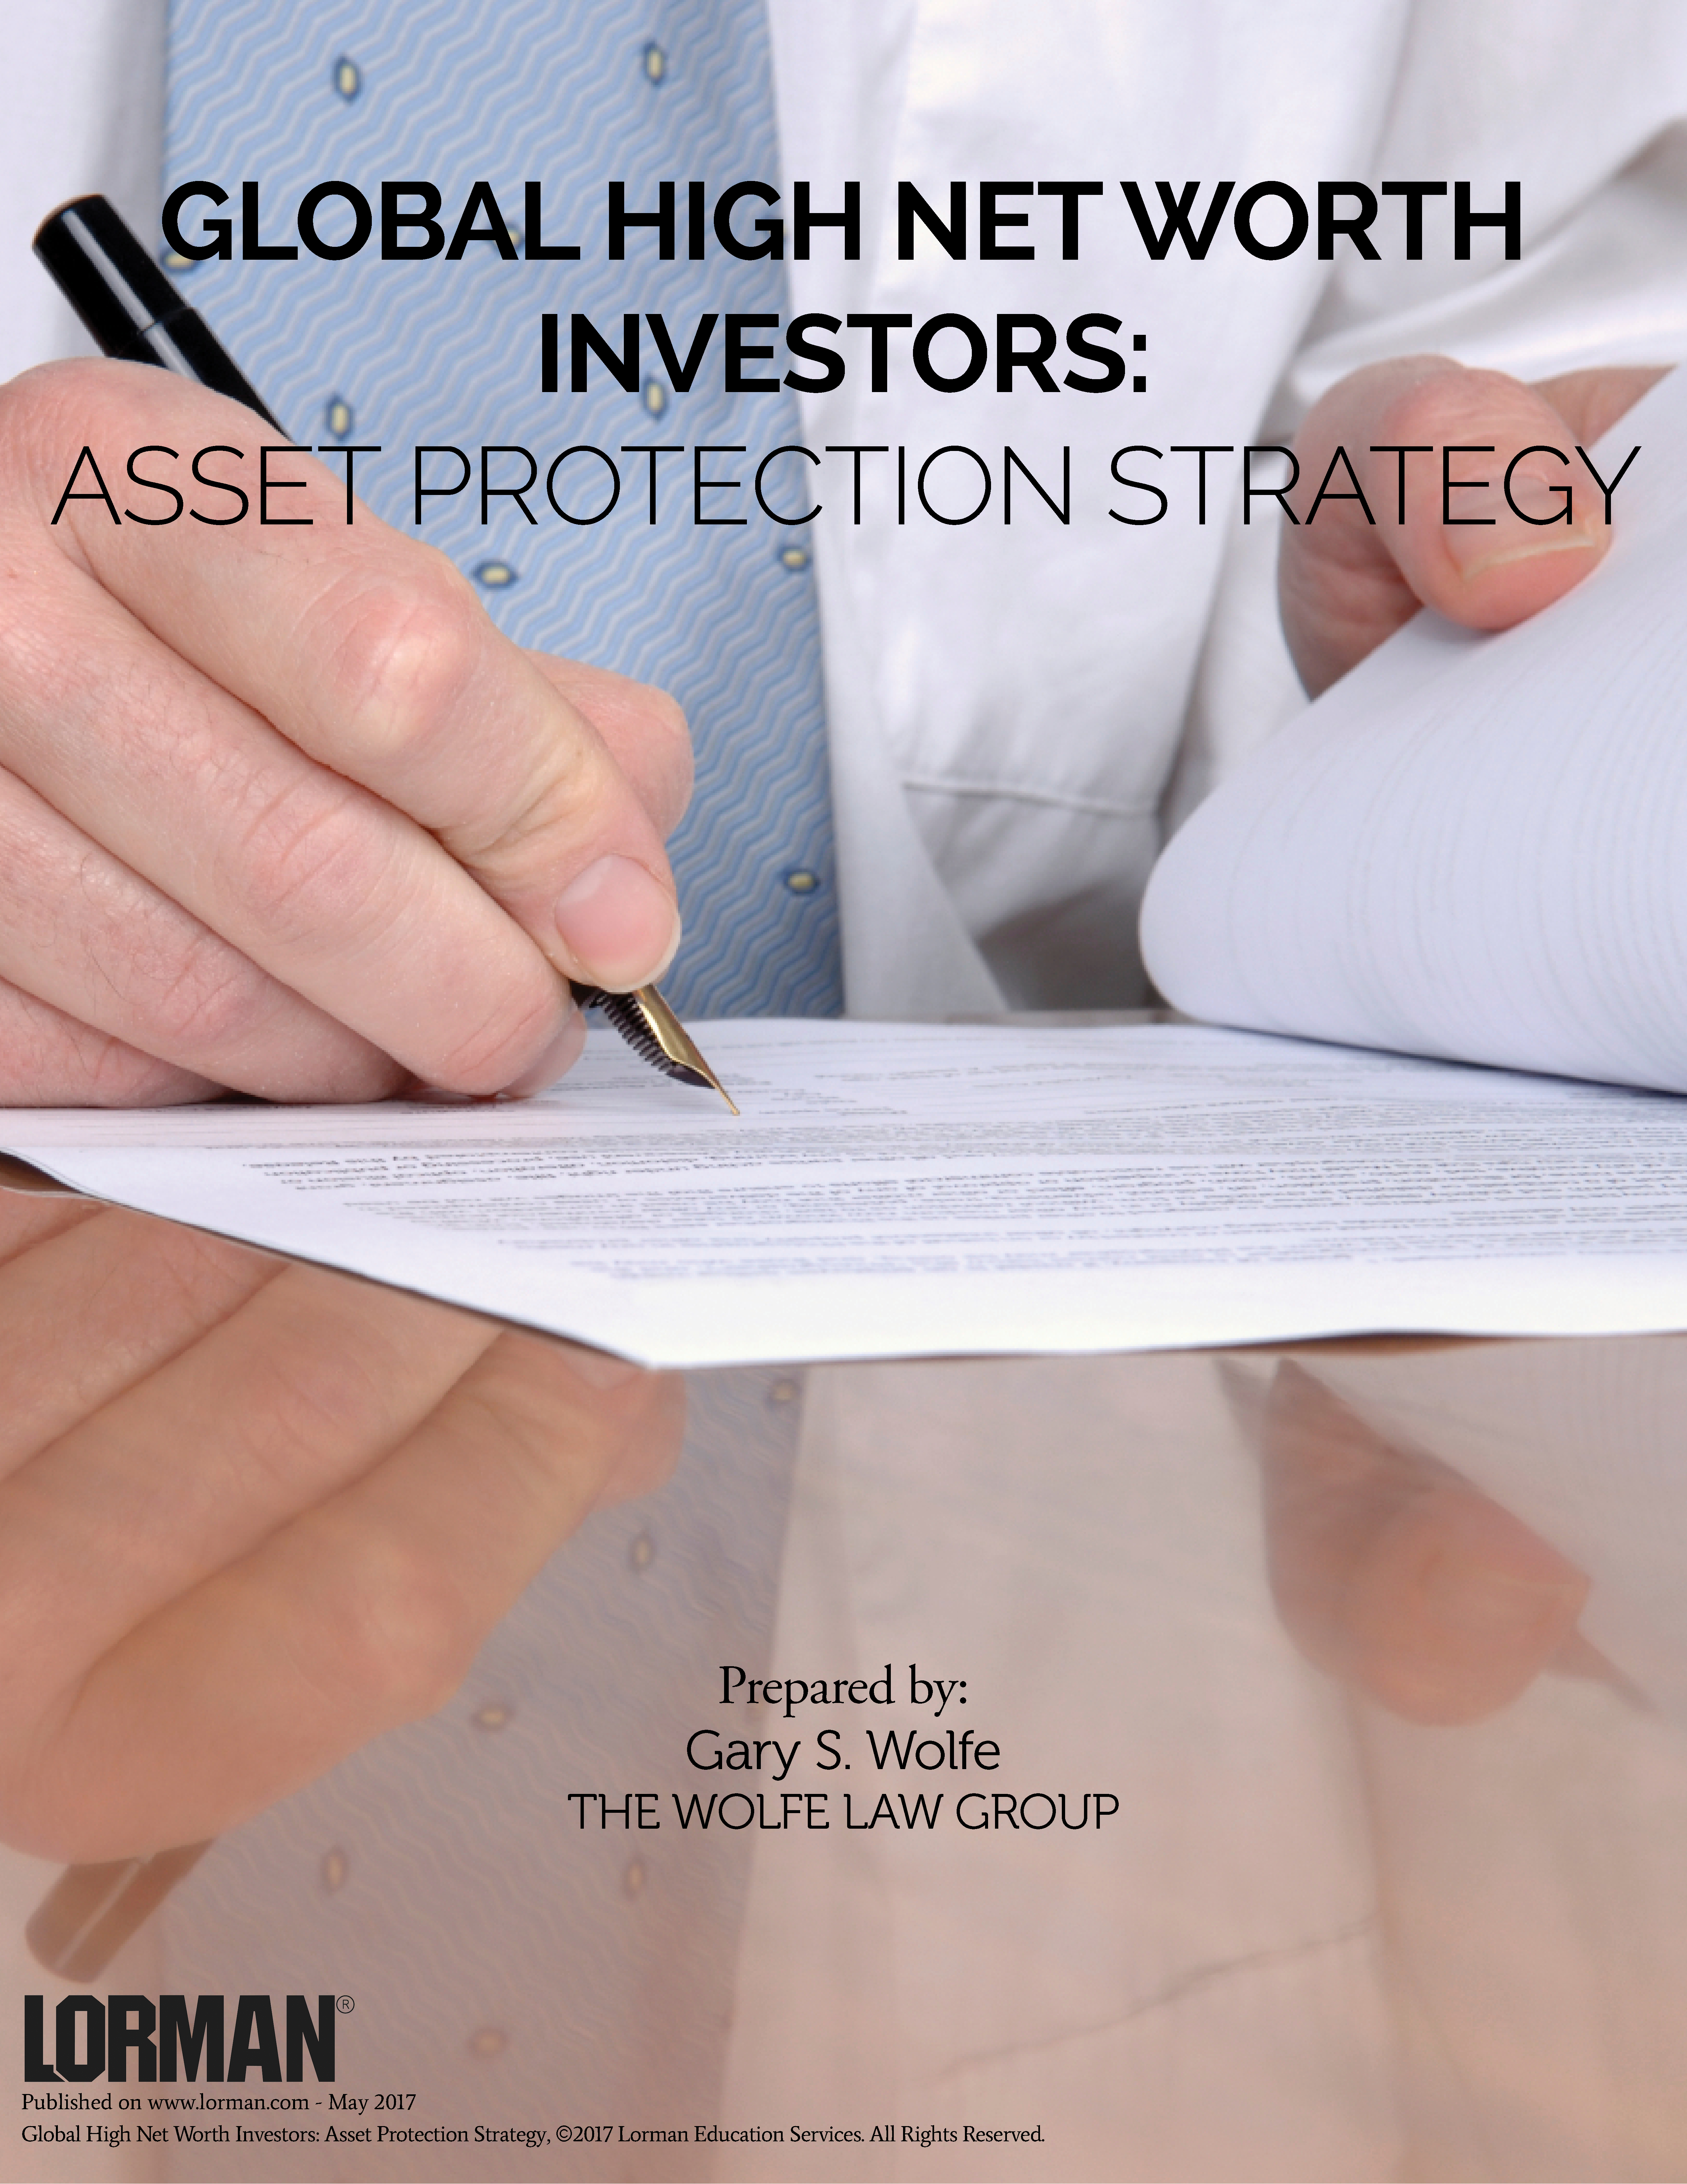 Global High Net Worth Investors: Asset Protection Strategy